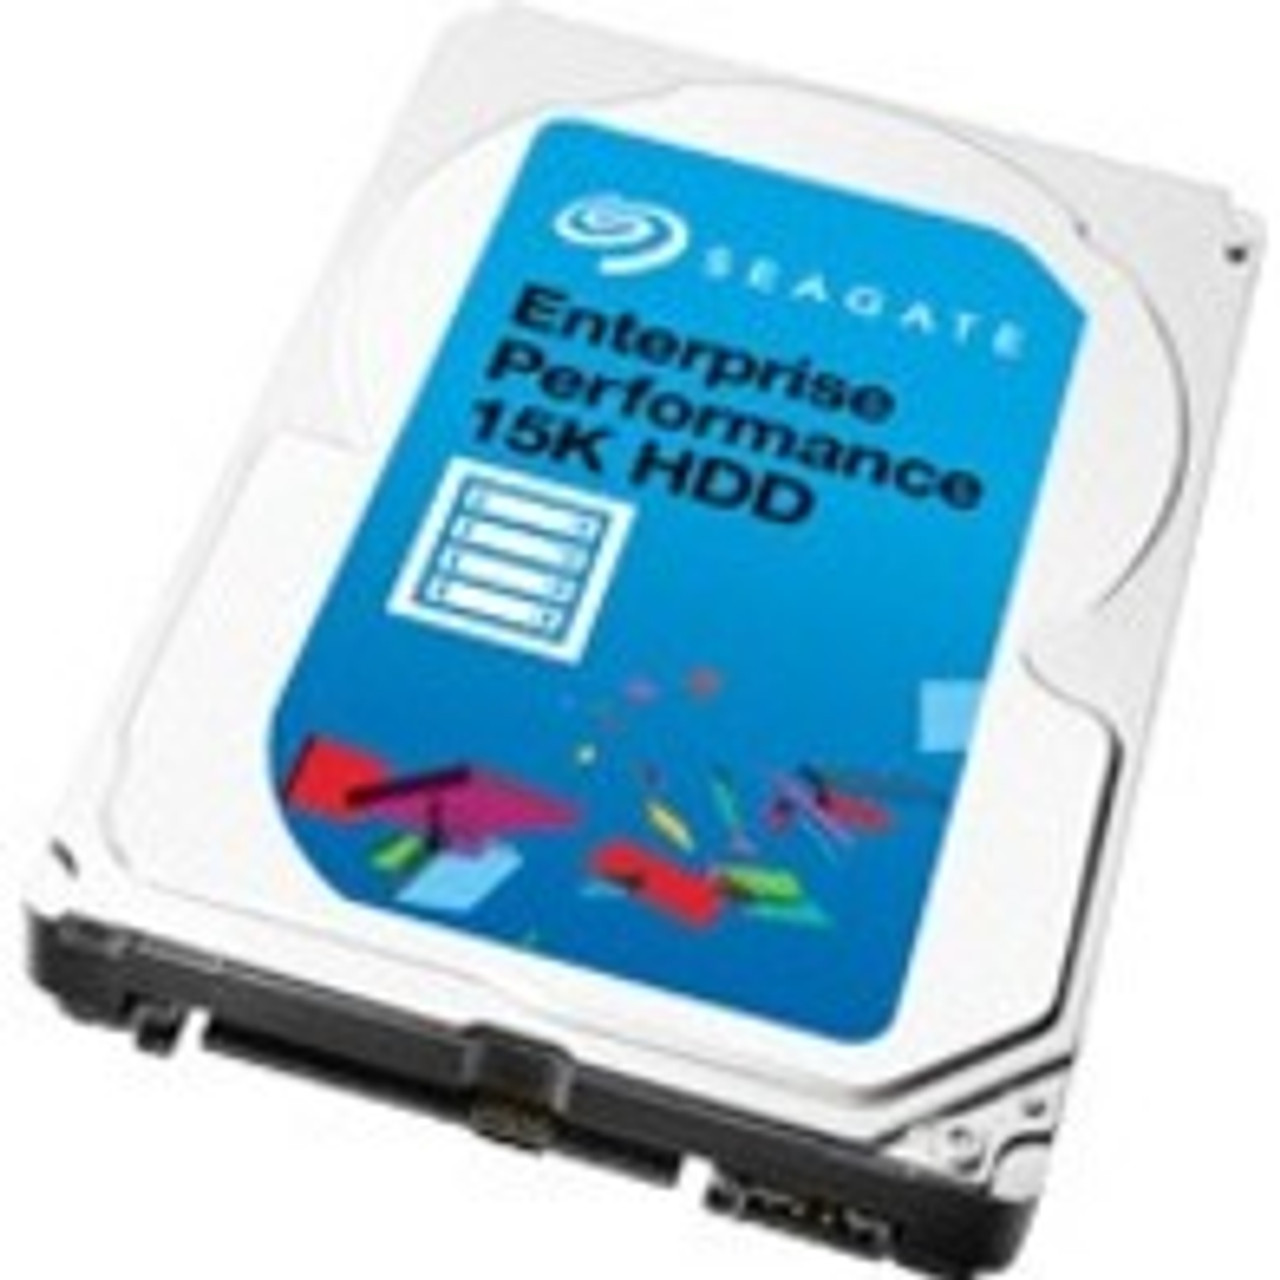 Seagate Certified Pre-Owned ST300MP0005 300 GB Hard Drive